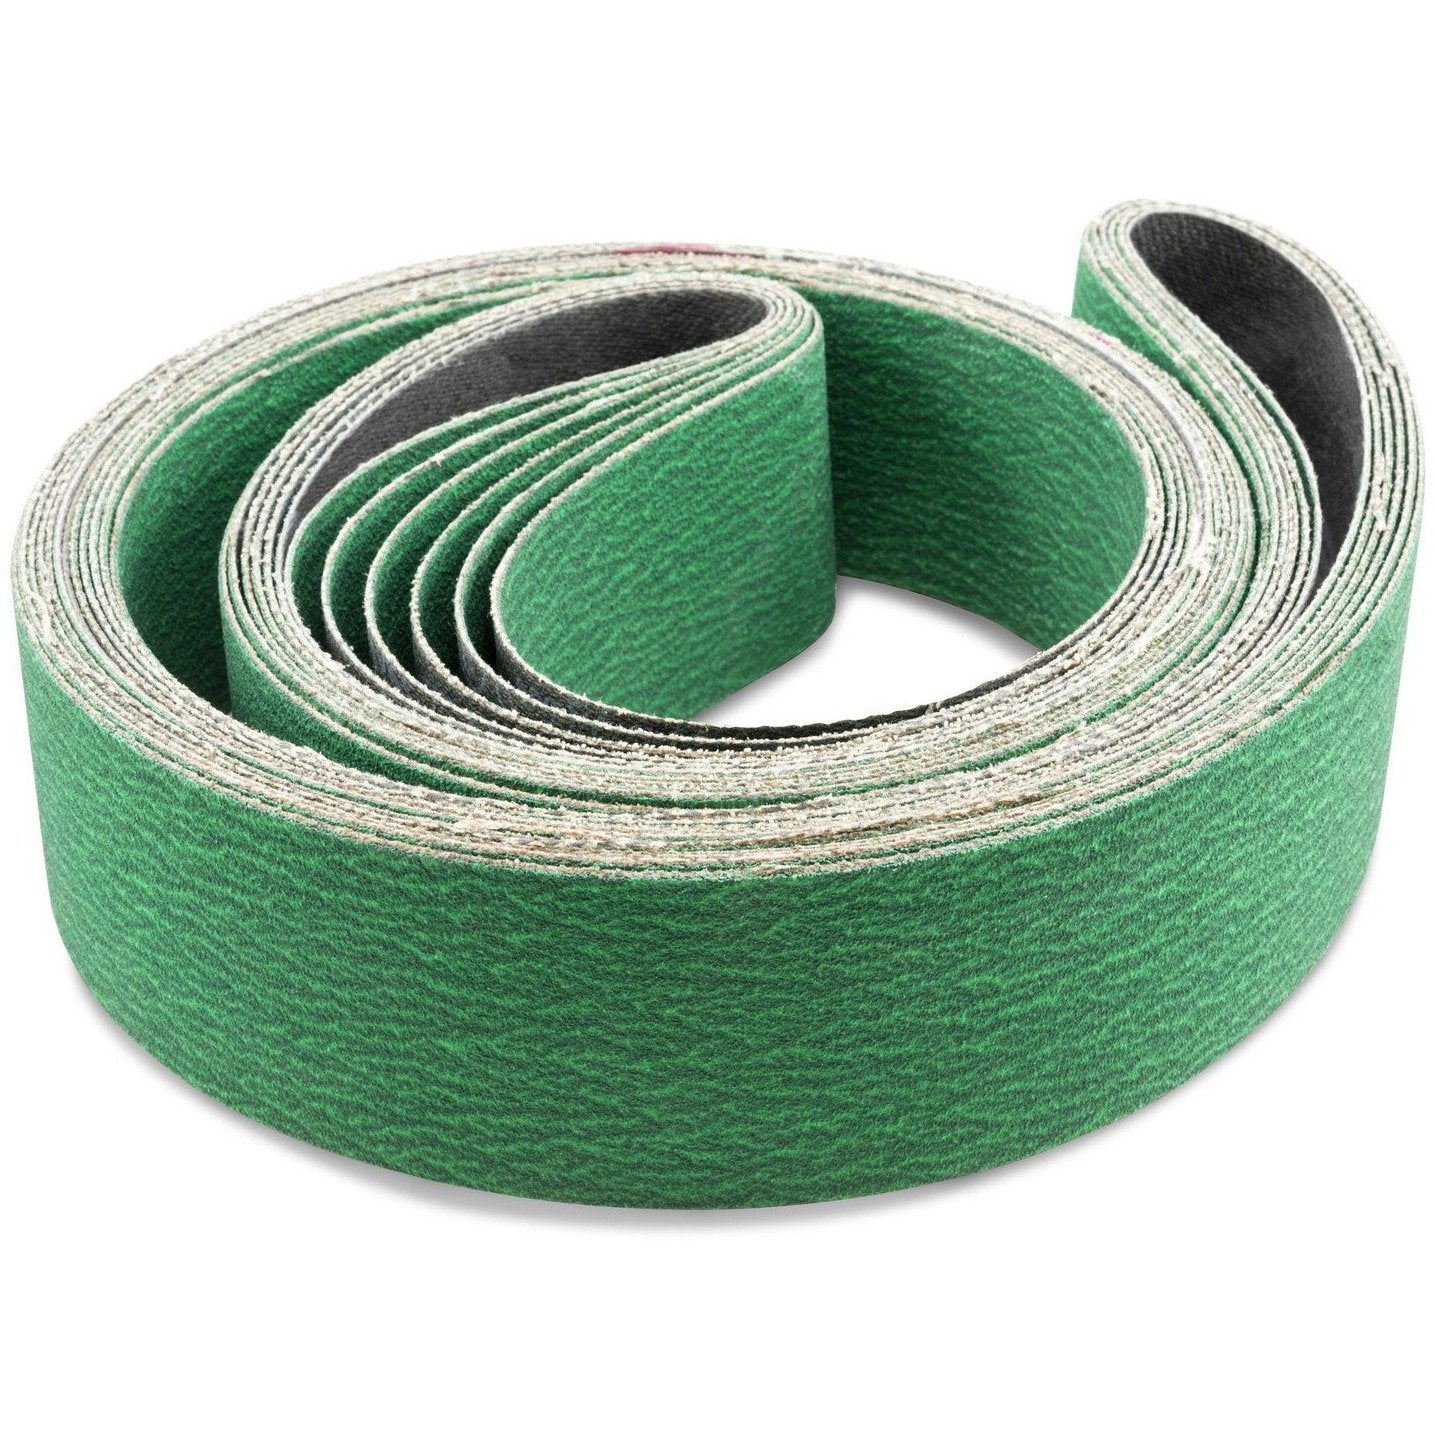 Zirconia Sanding Belts | High-Quality | Free Shipping - Red Label